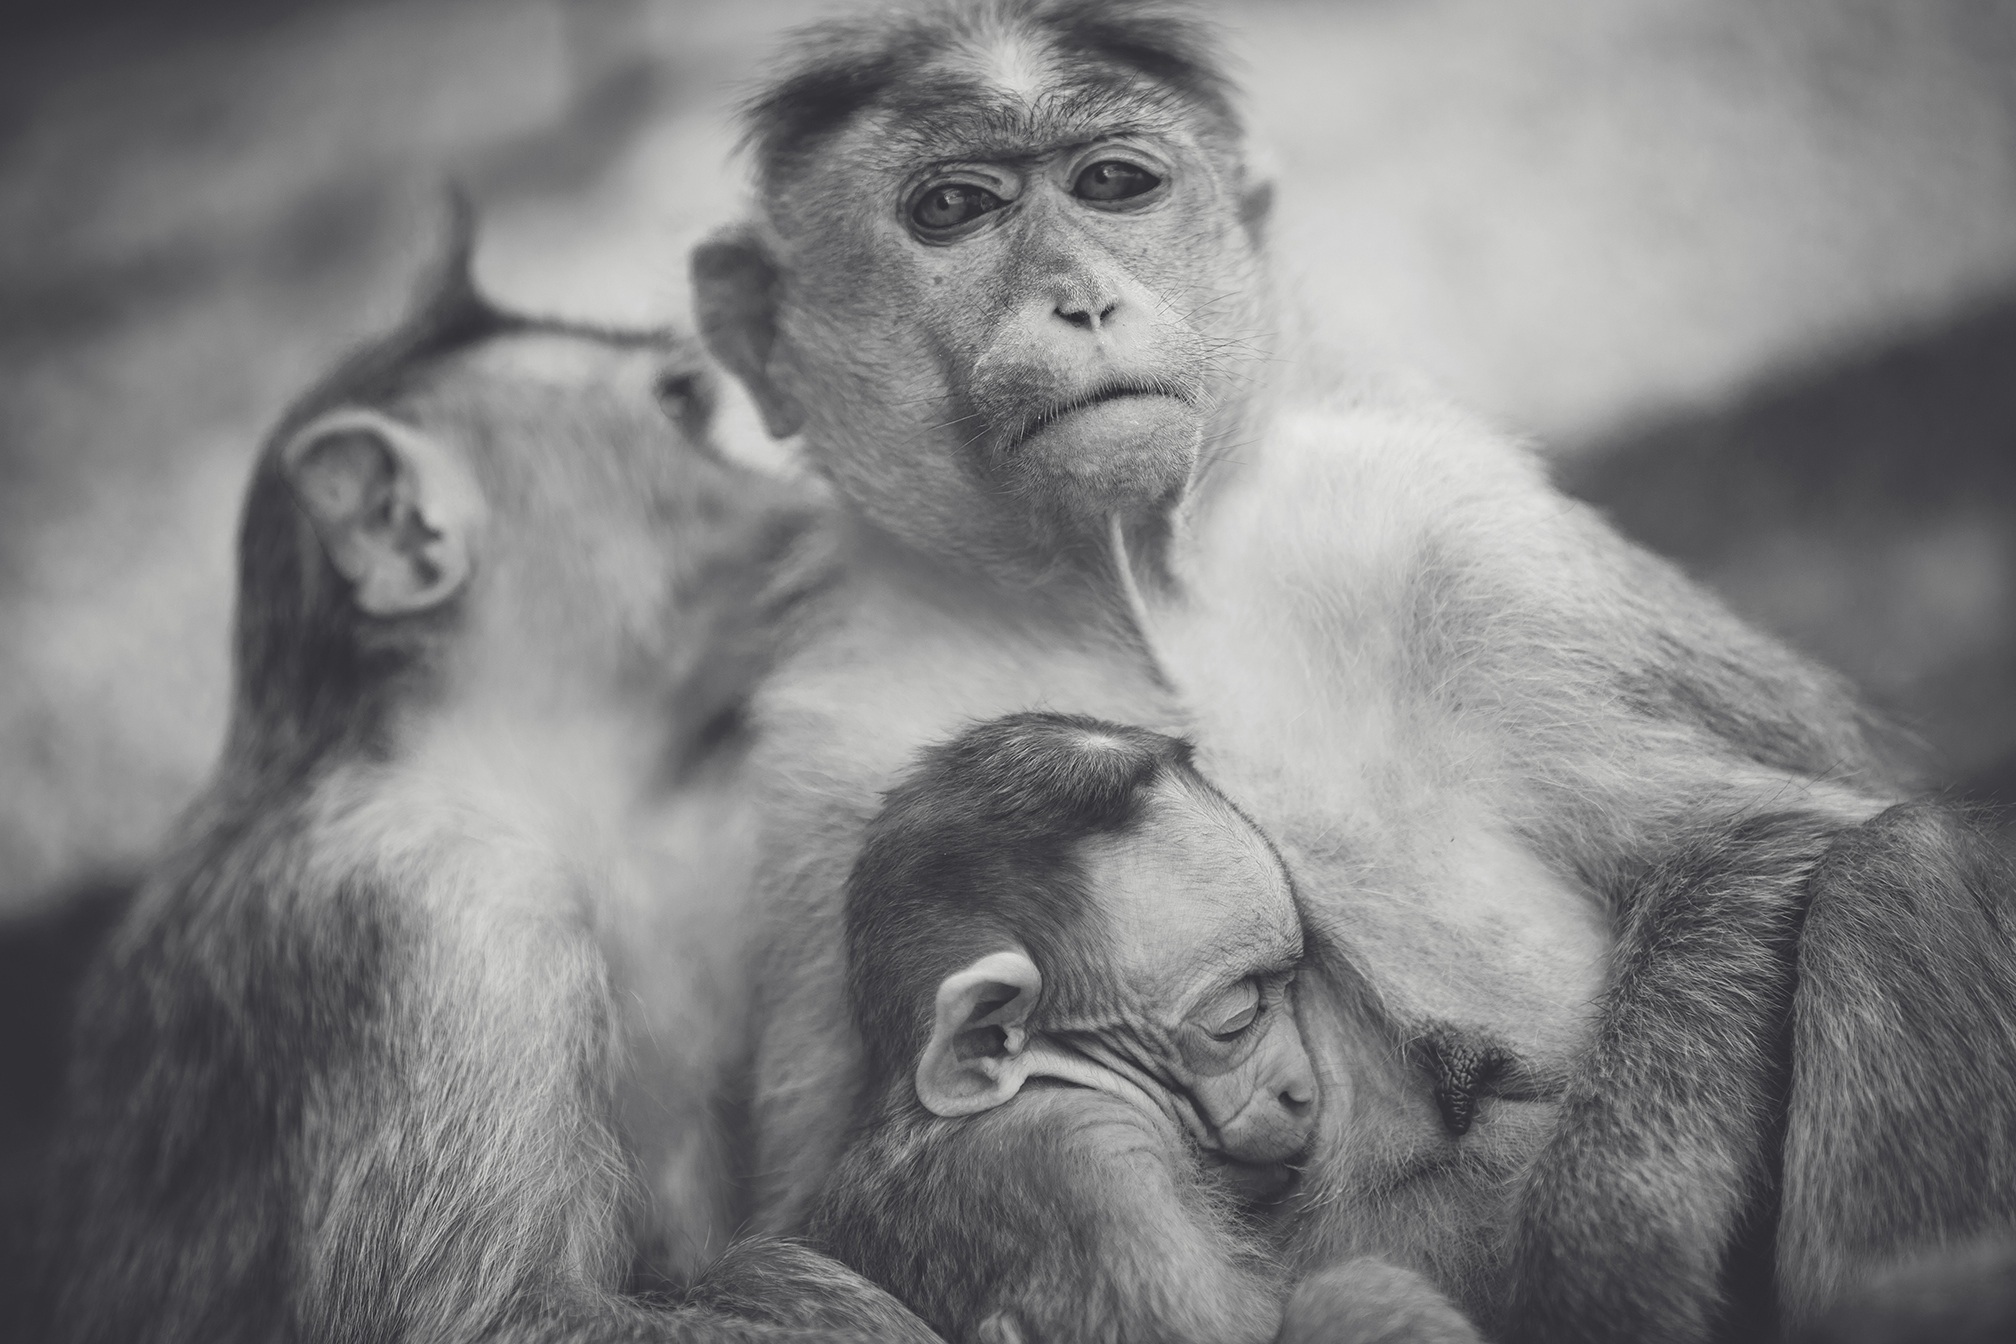 bw, animals, monkeys, young, chb, joey wallpaper for mobile